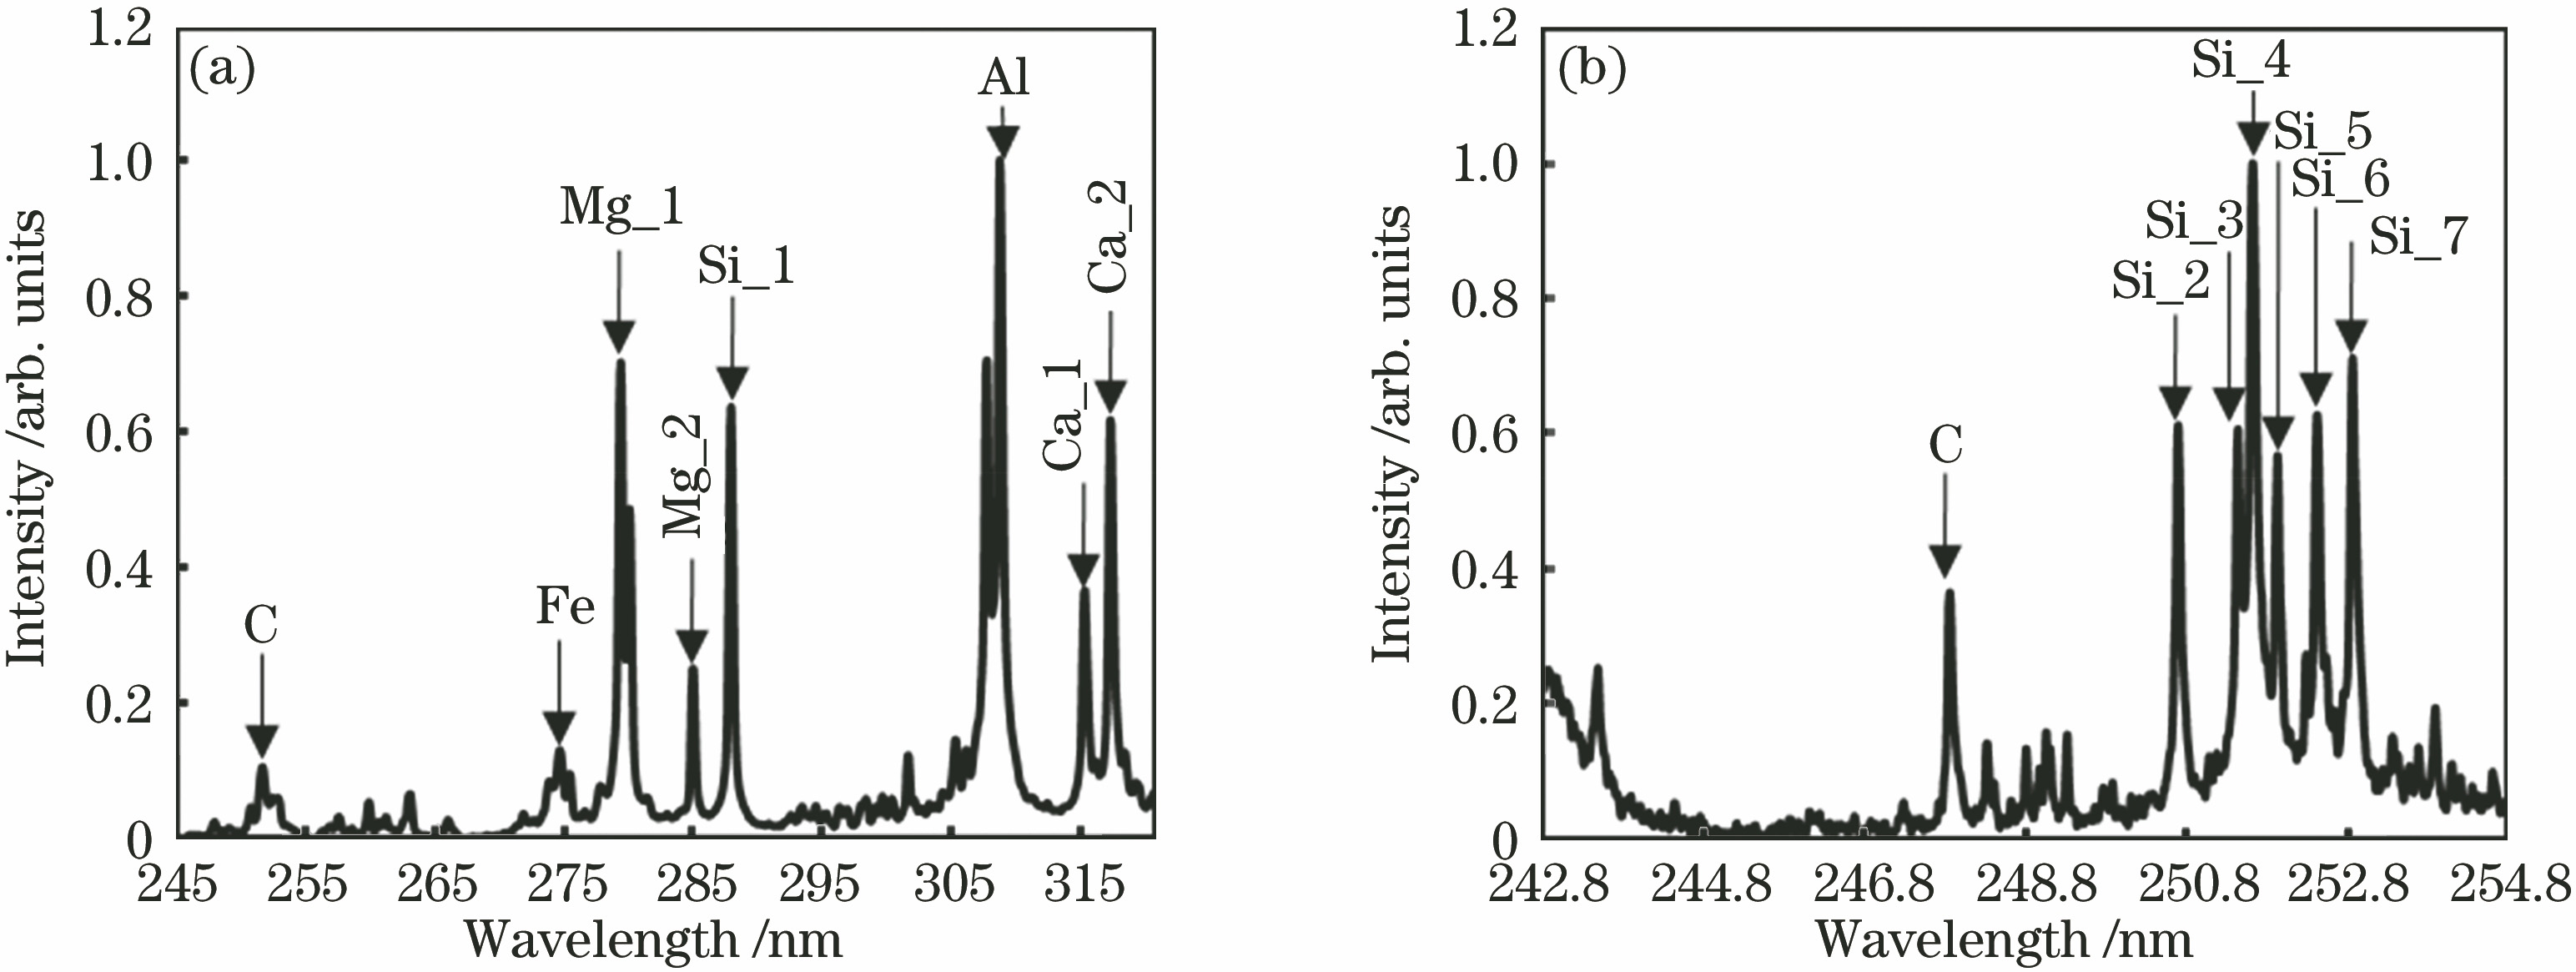 LIBS spectra of sample GD_0 at different resolutions. (a) Resolution is 0.075 nm/pixel; (b) resolution is 0.012 nm/pixel